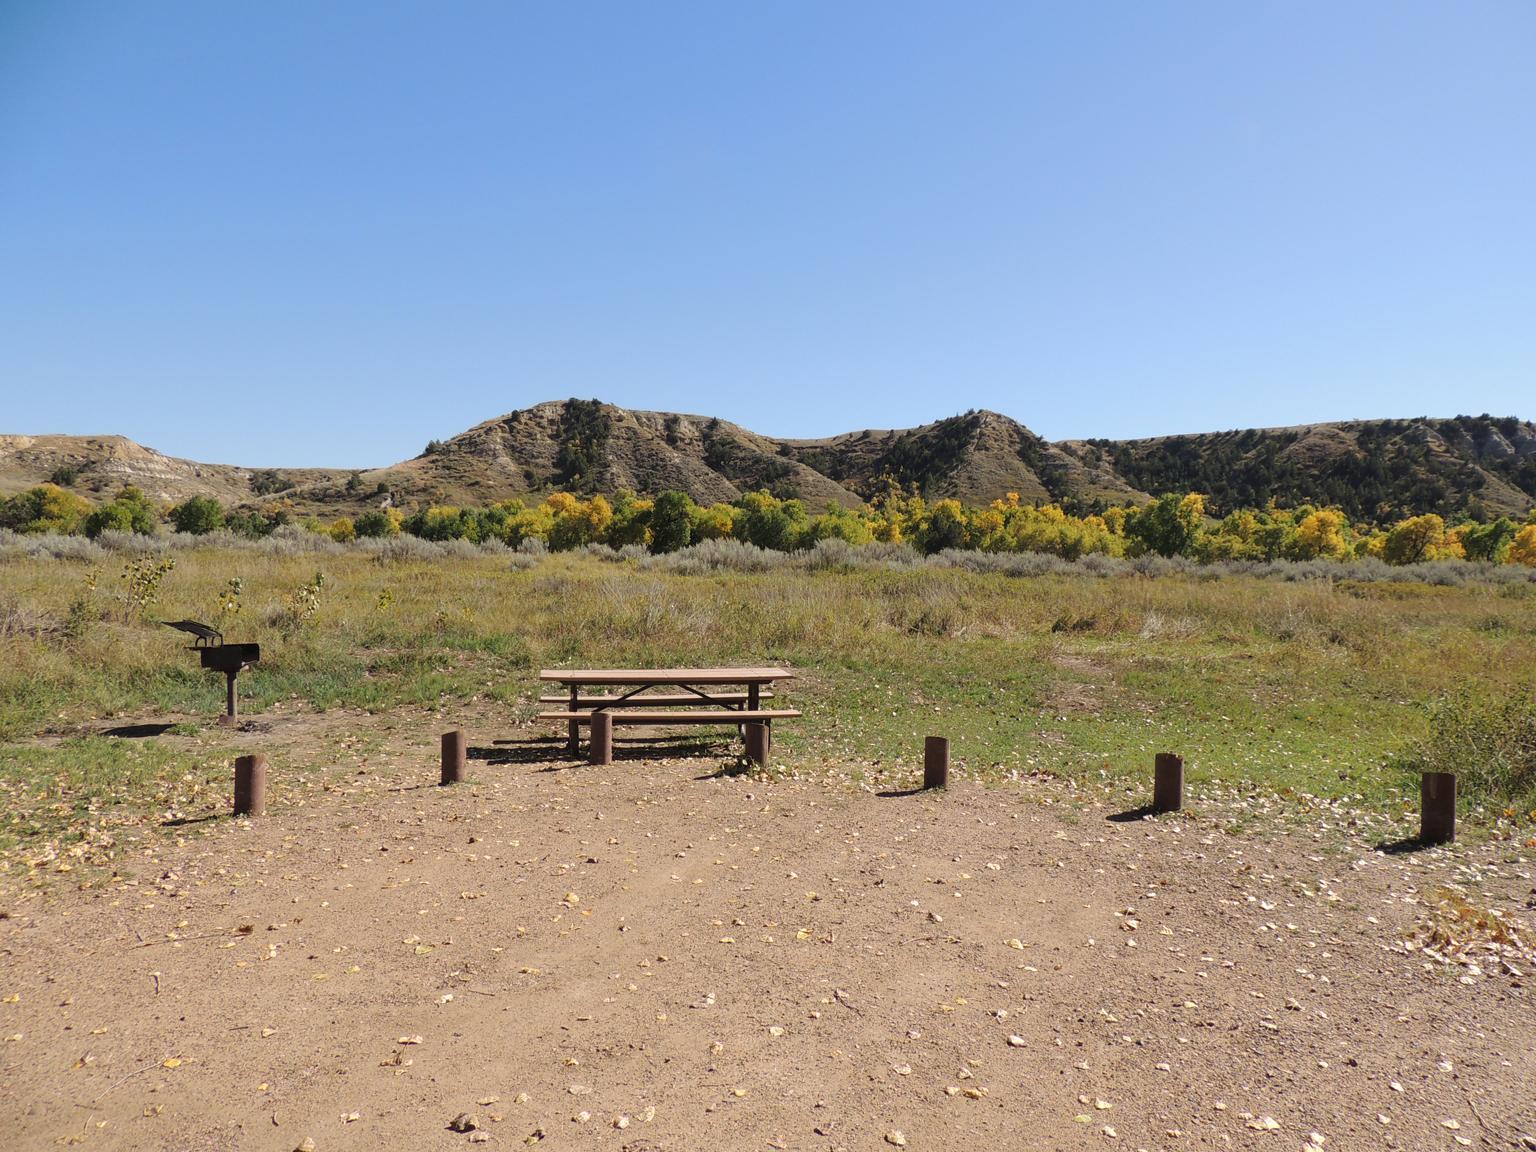 A campsite in an open, grassy area with buttes and fall leaves in the background.